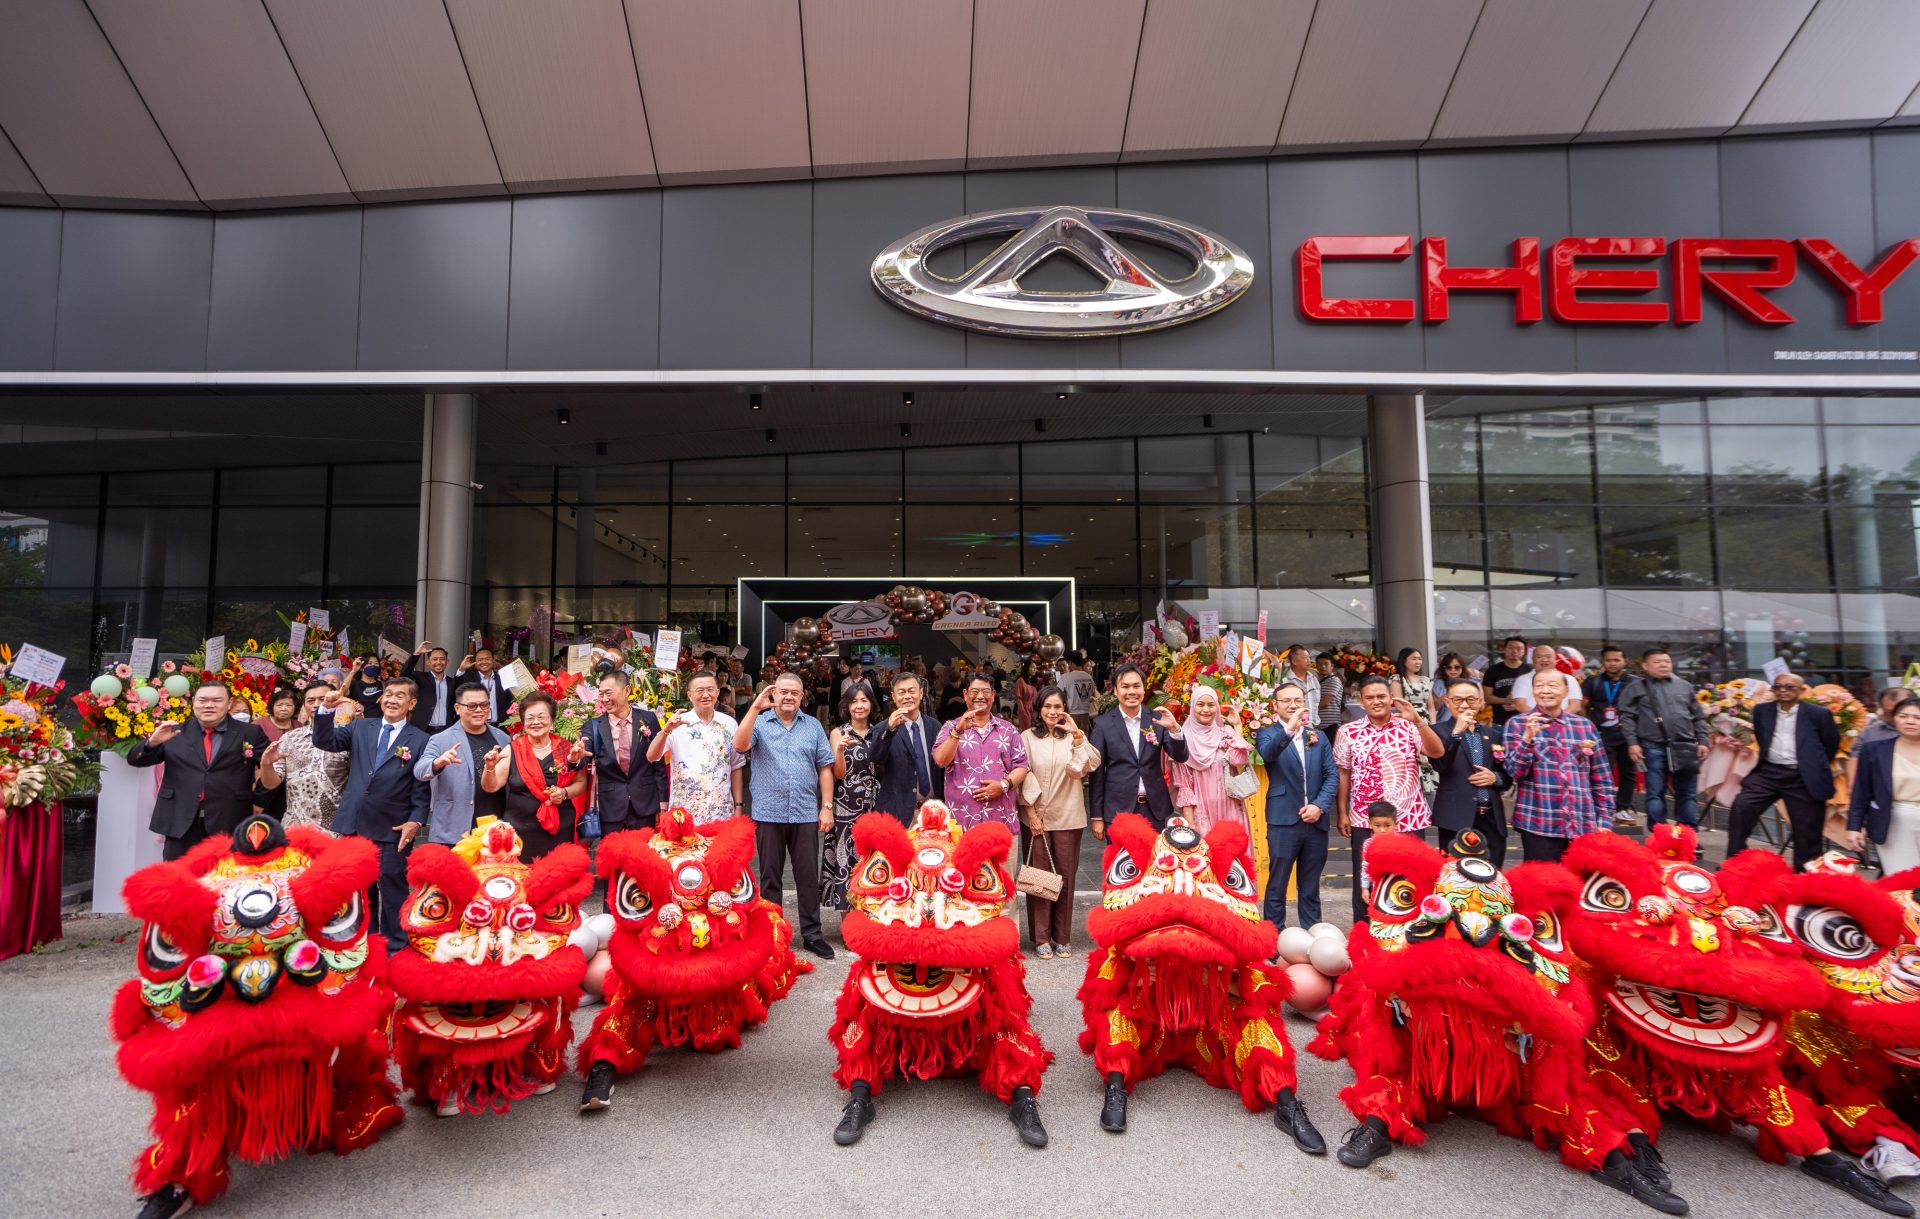 CHERY Malaysia Celebrating Another Grand Official Opening of Chery Flagship 4S for Southern Region, Largest 4S in Malaysia